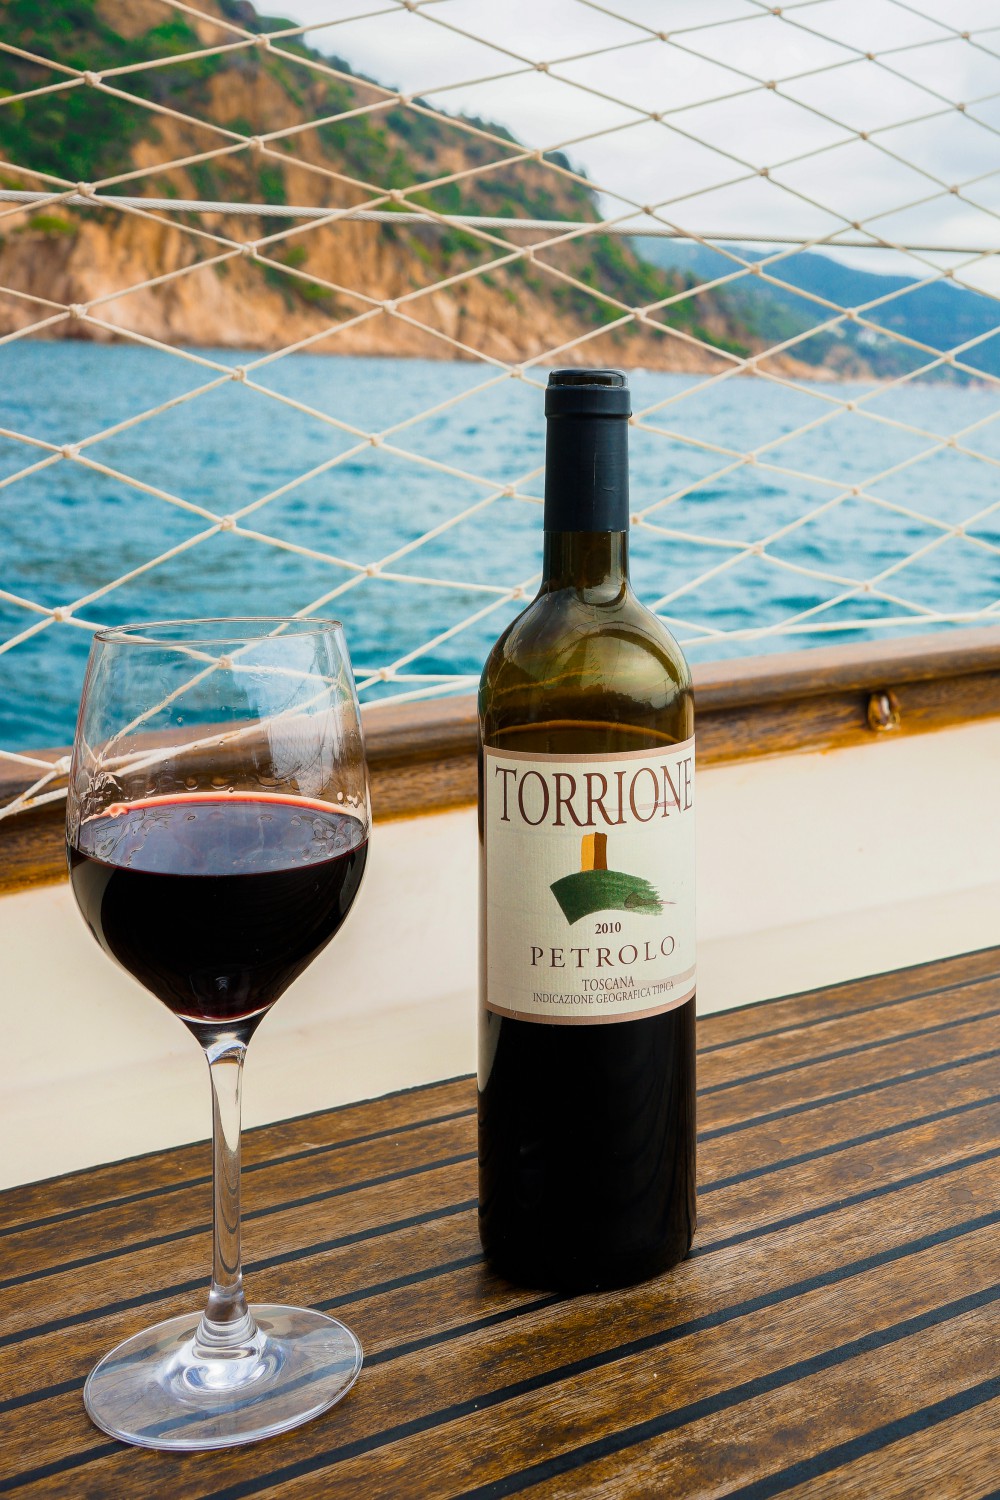 A sailing day with a bottle of Petrolo